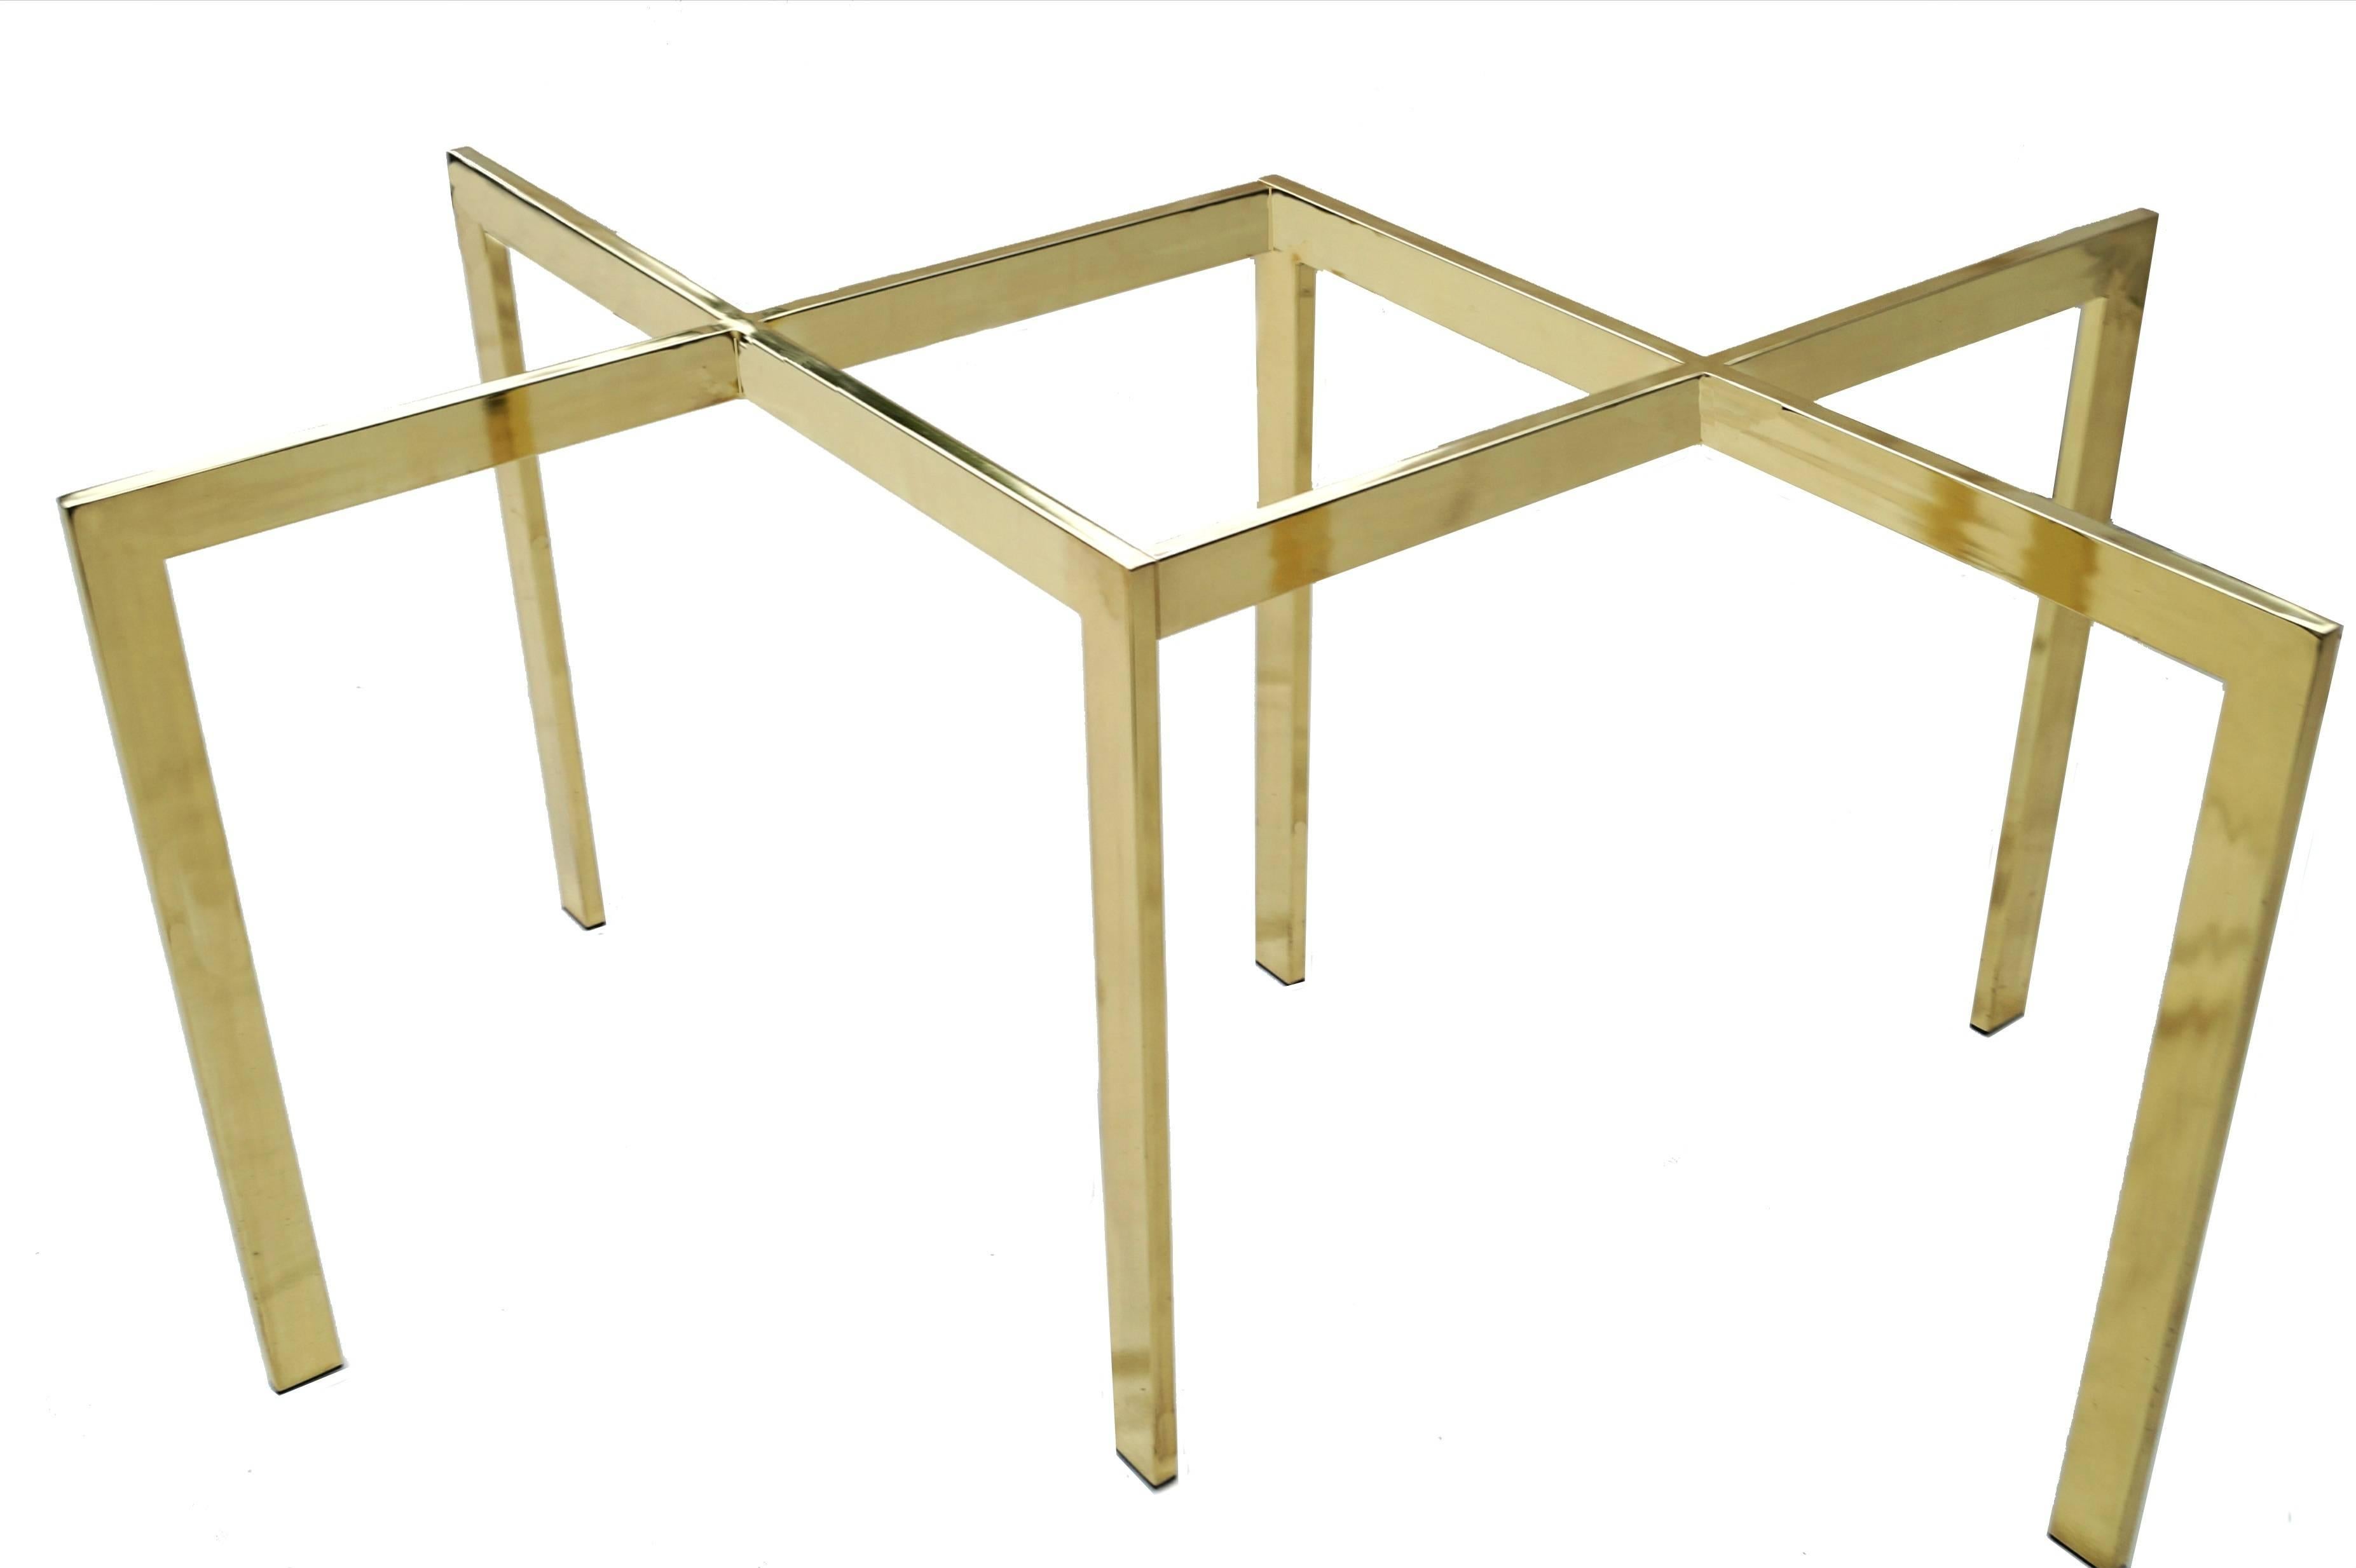 Milo Baughman Thayer Coggin brass bronze top X glass dining table. The base alone measures 55.75